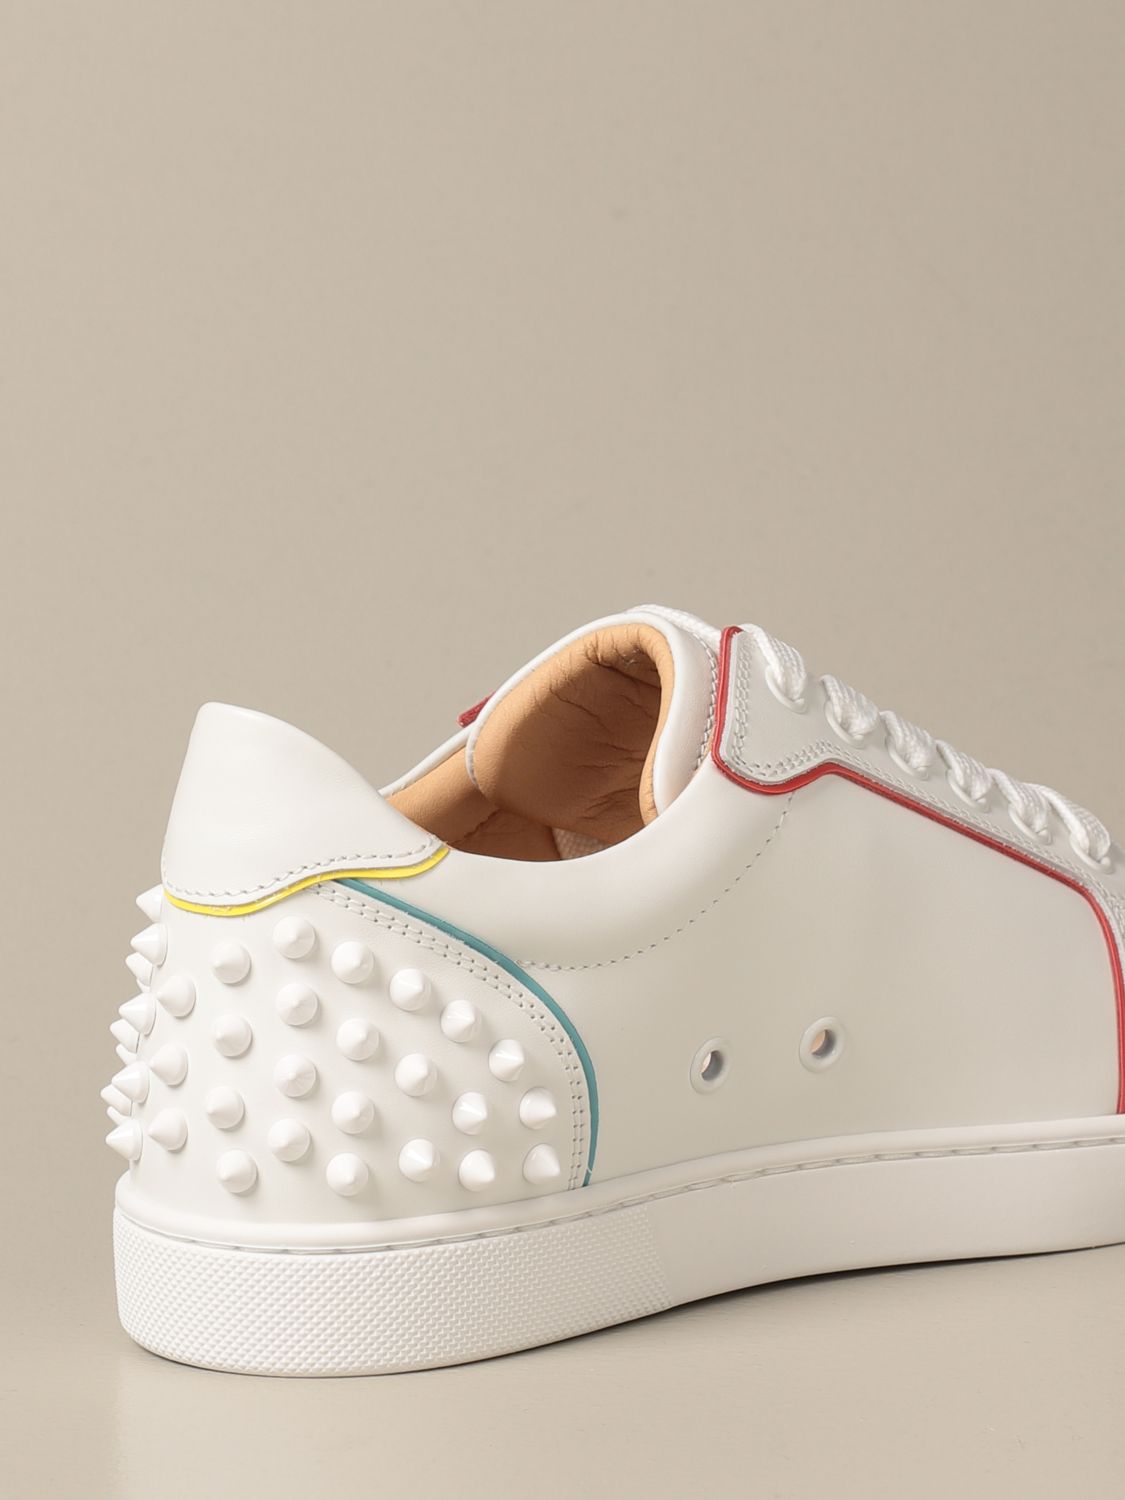 Vierissima 2 Christian Louboutin sneakers in split leather with studs